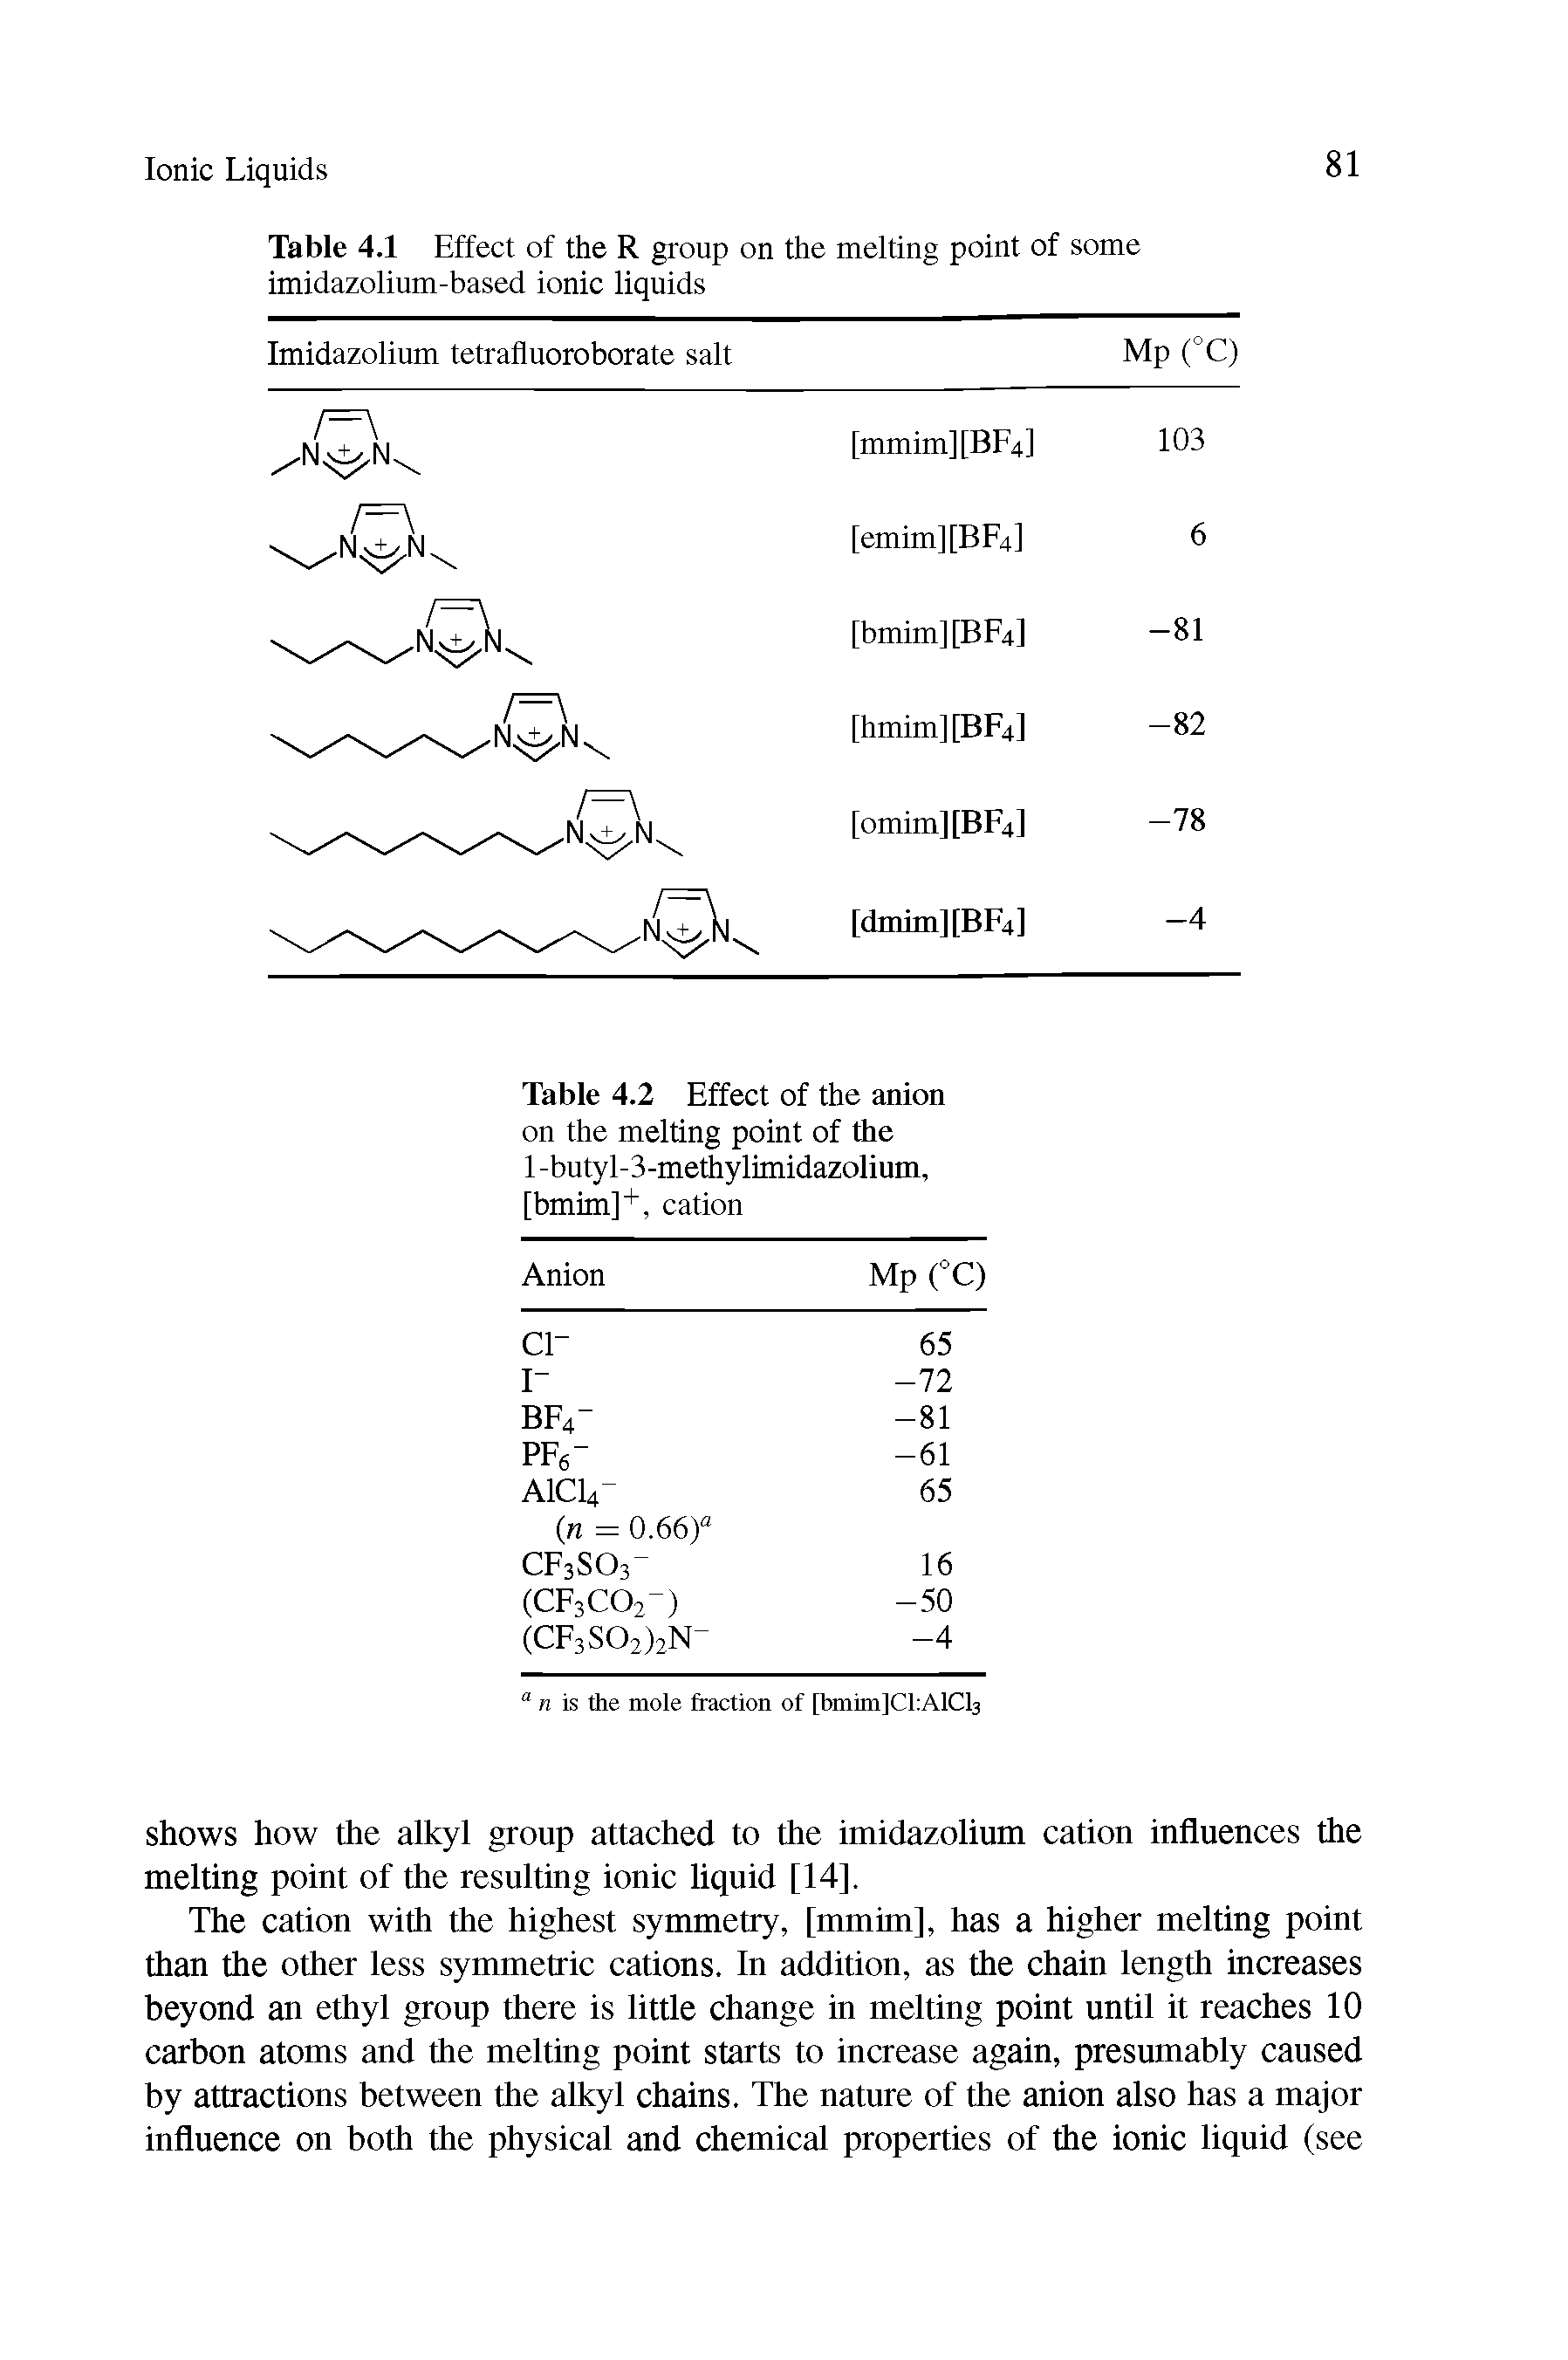 Table 4.2 Effect of the anion on the melting point of the 1 -butyl-3-methylimidazolium, [bmim]+, cation...